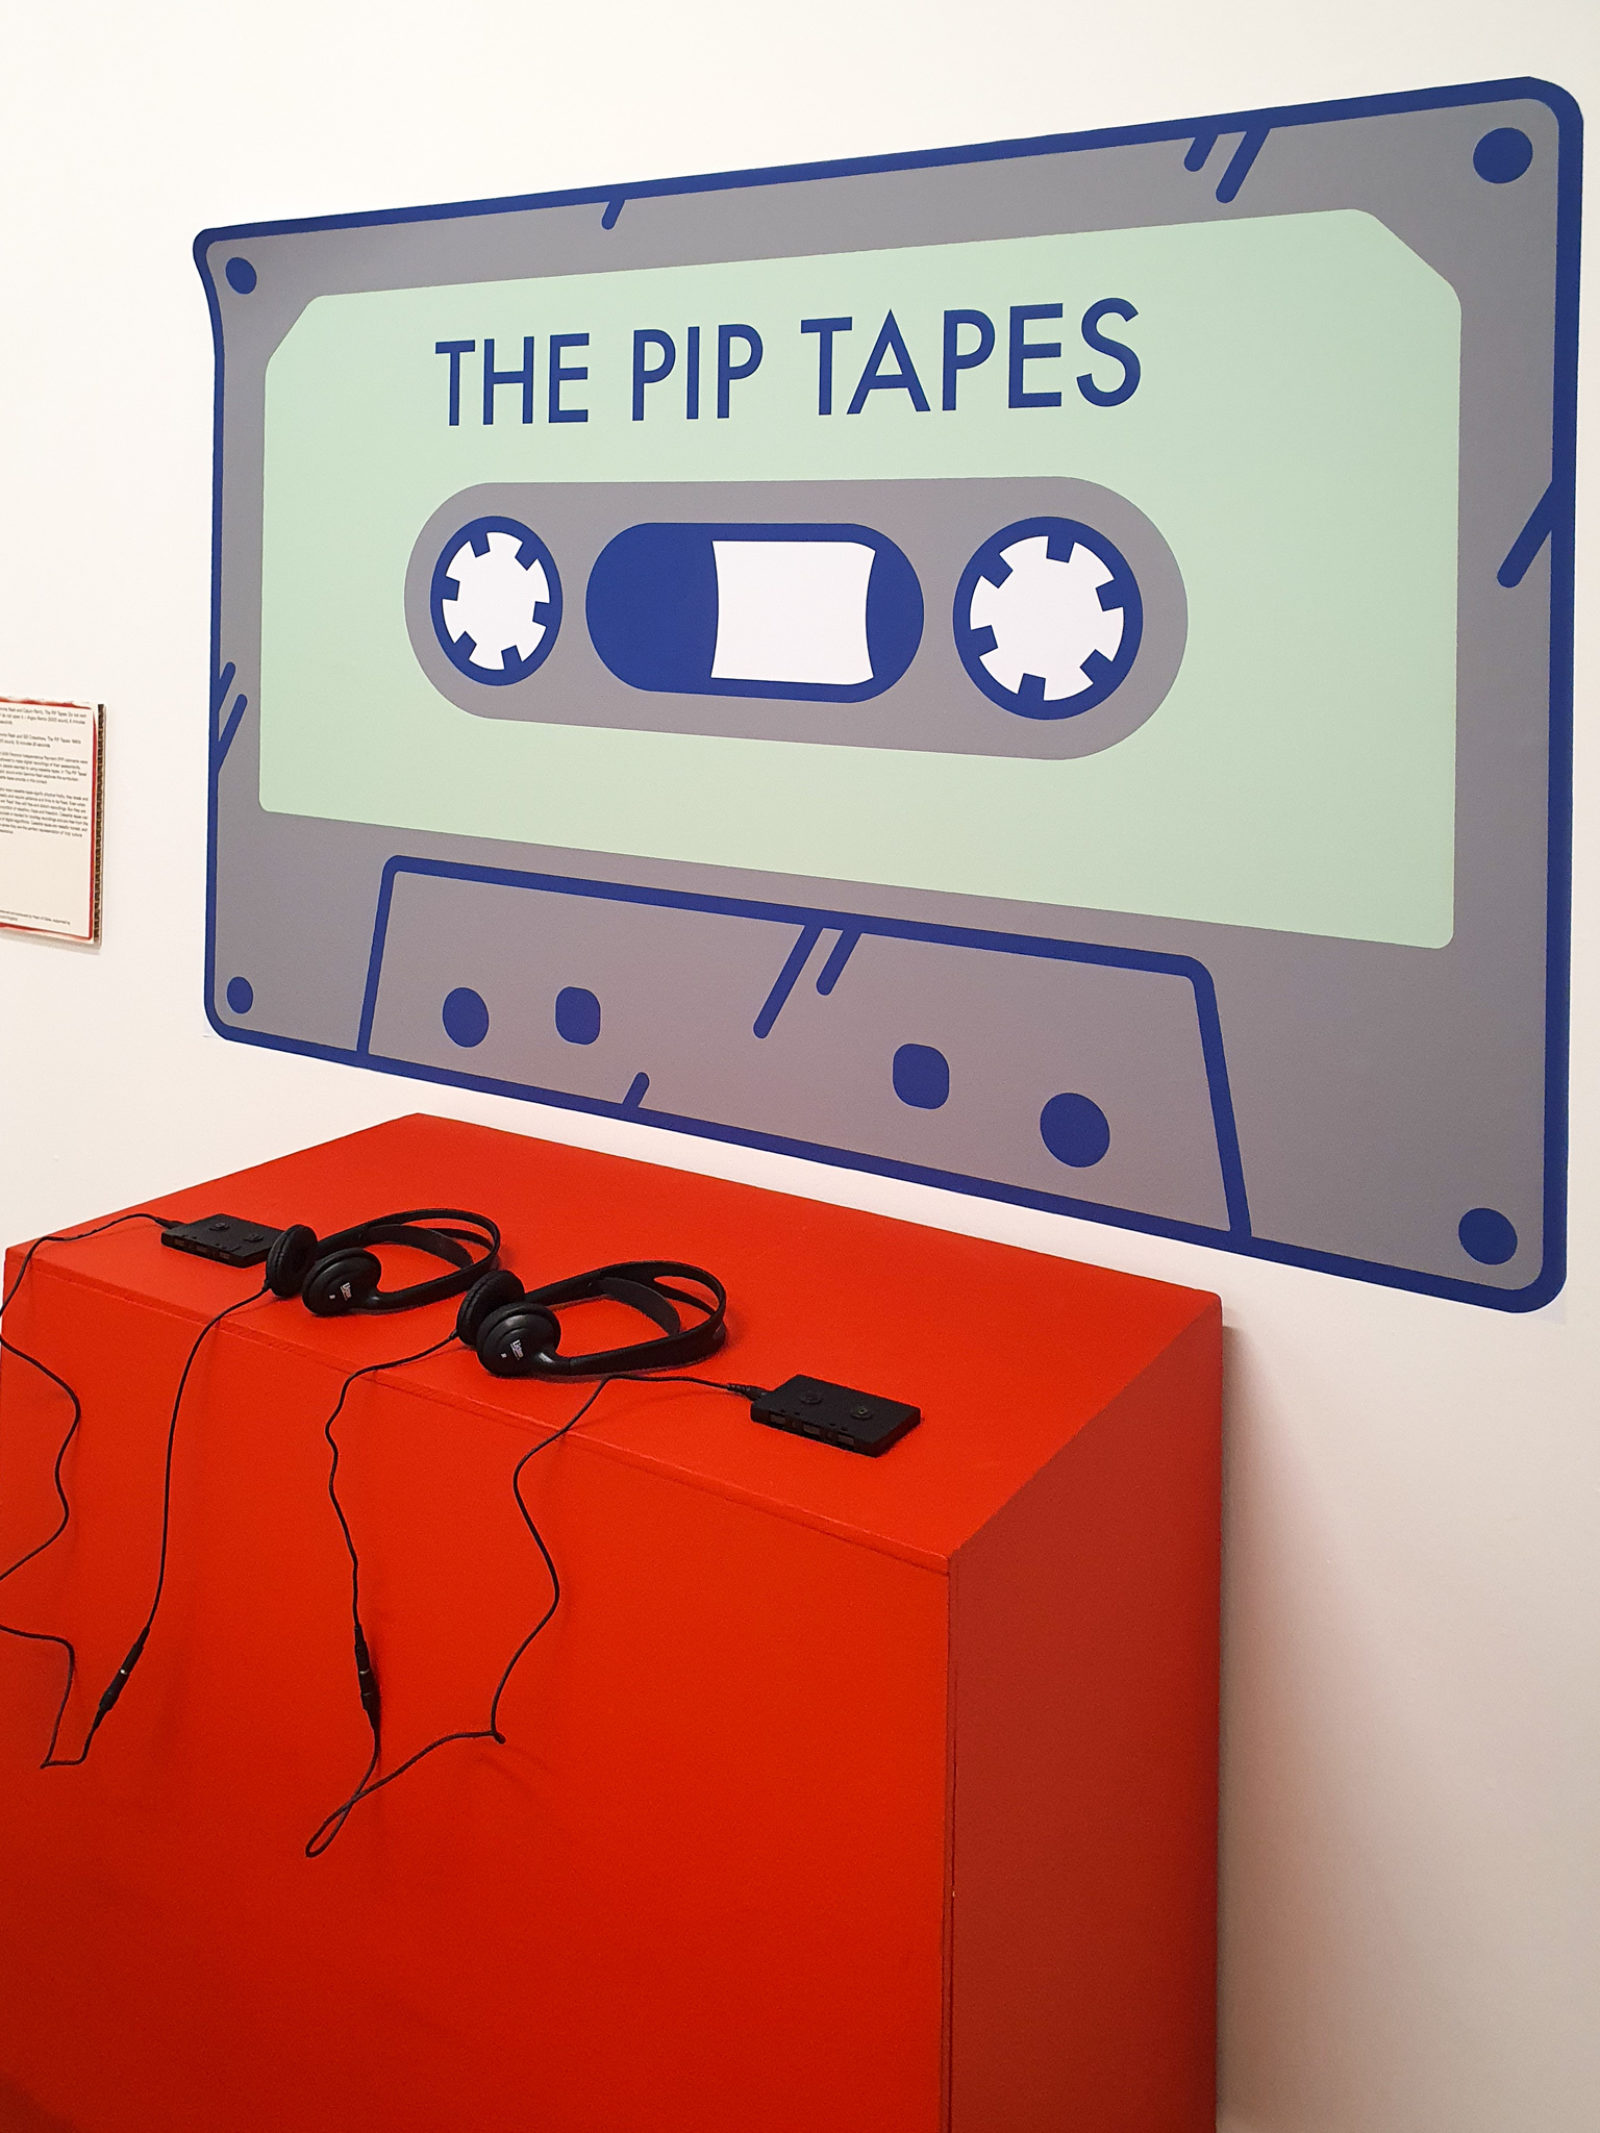 A photo of 'The PIP tapes' set up at the People's History Museum in Manchester. There is a red box with 2 sets of headphones plugged into 2 tapes, and a large tape printed on the wall with the words 'The PIP Tapes' on it.